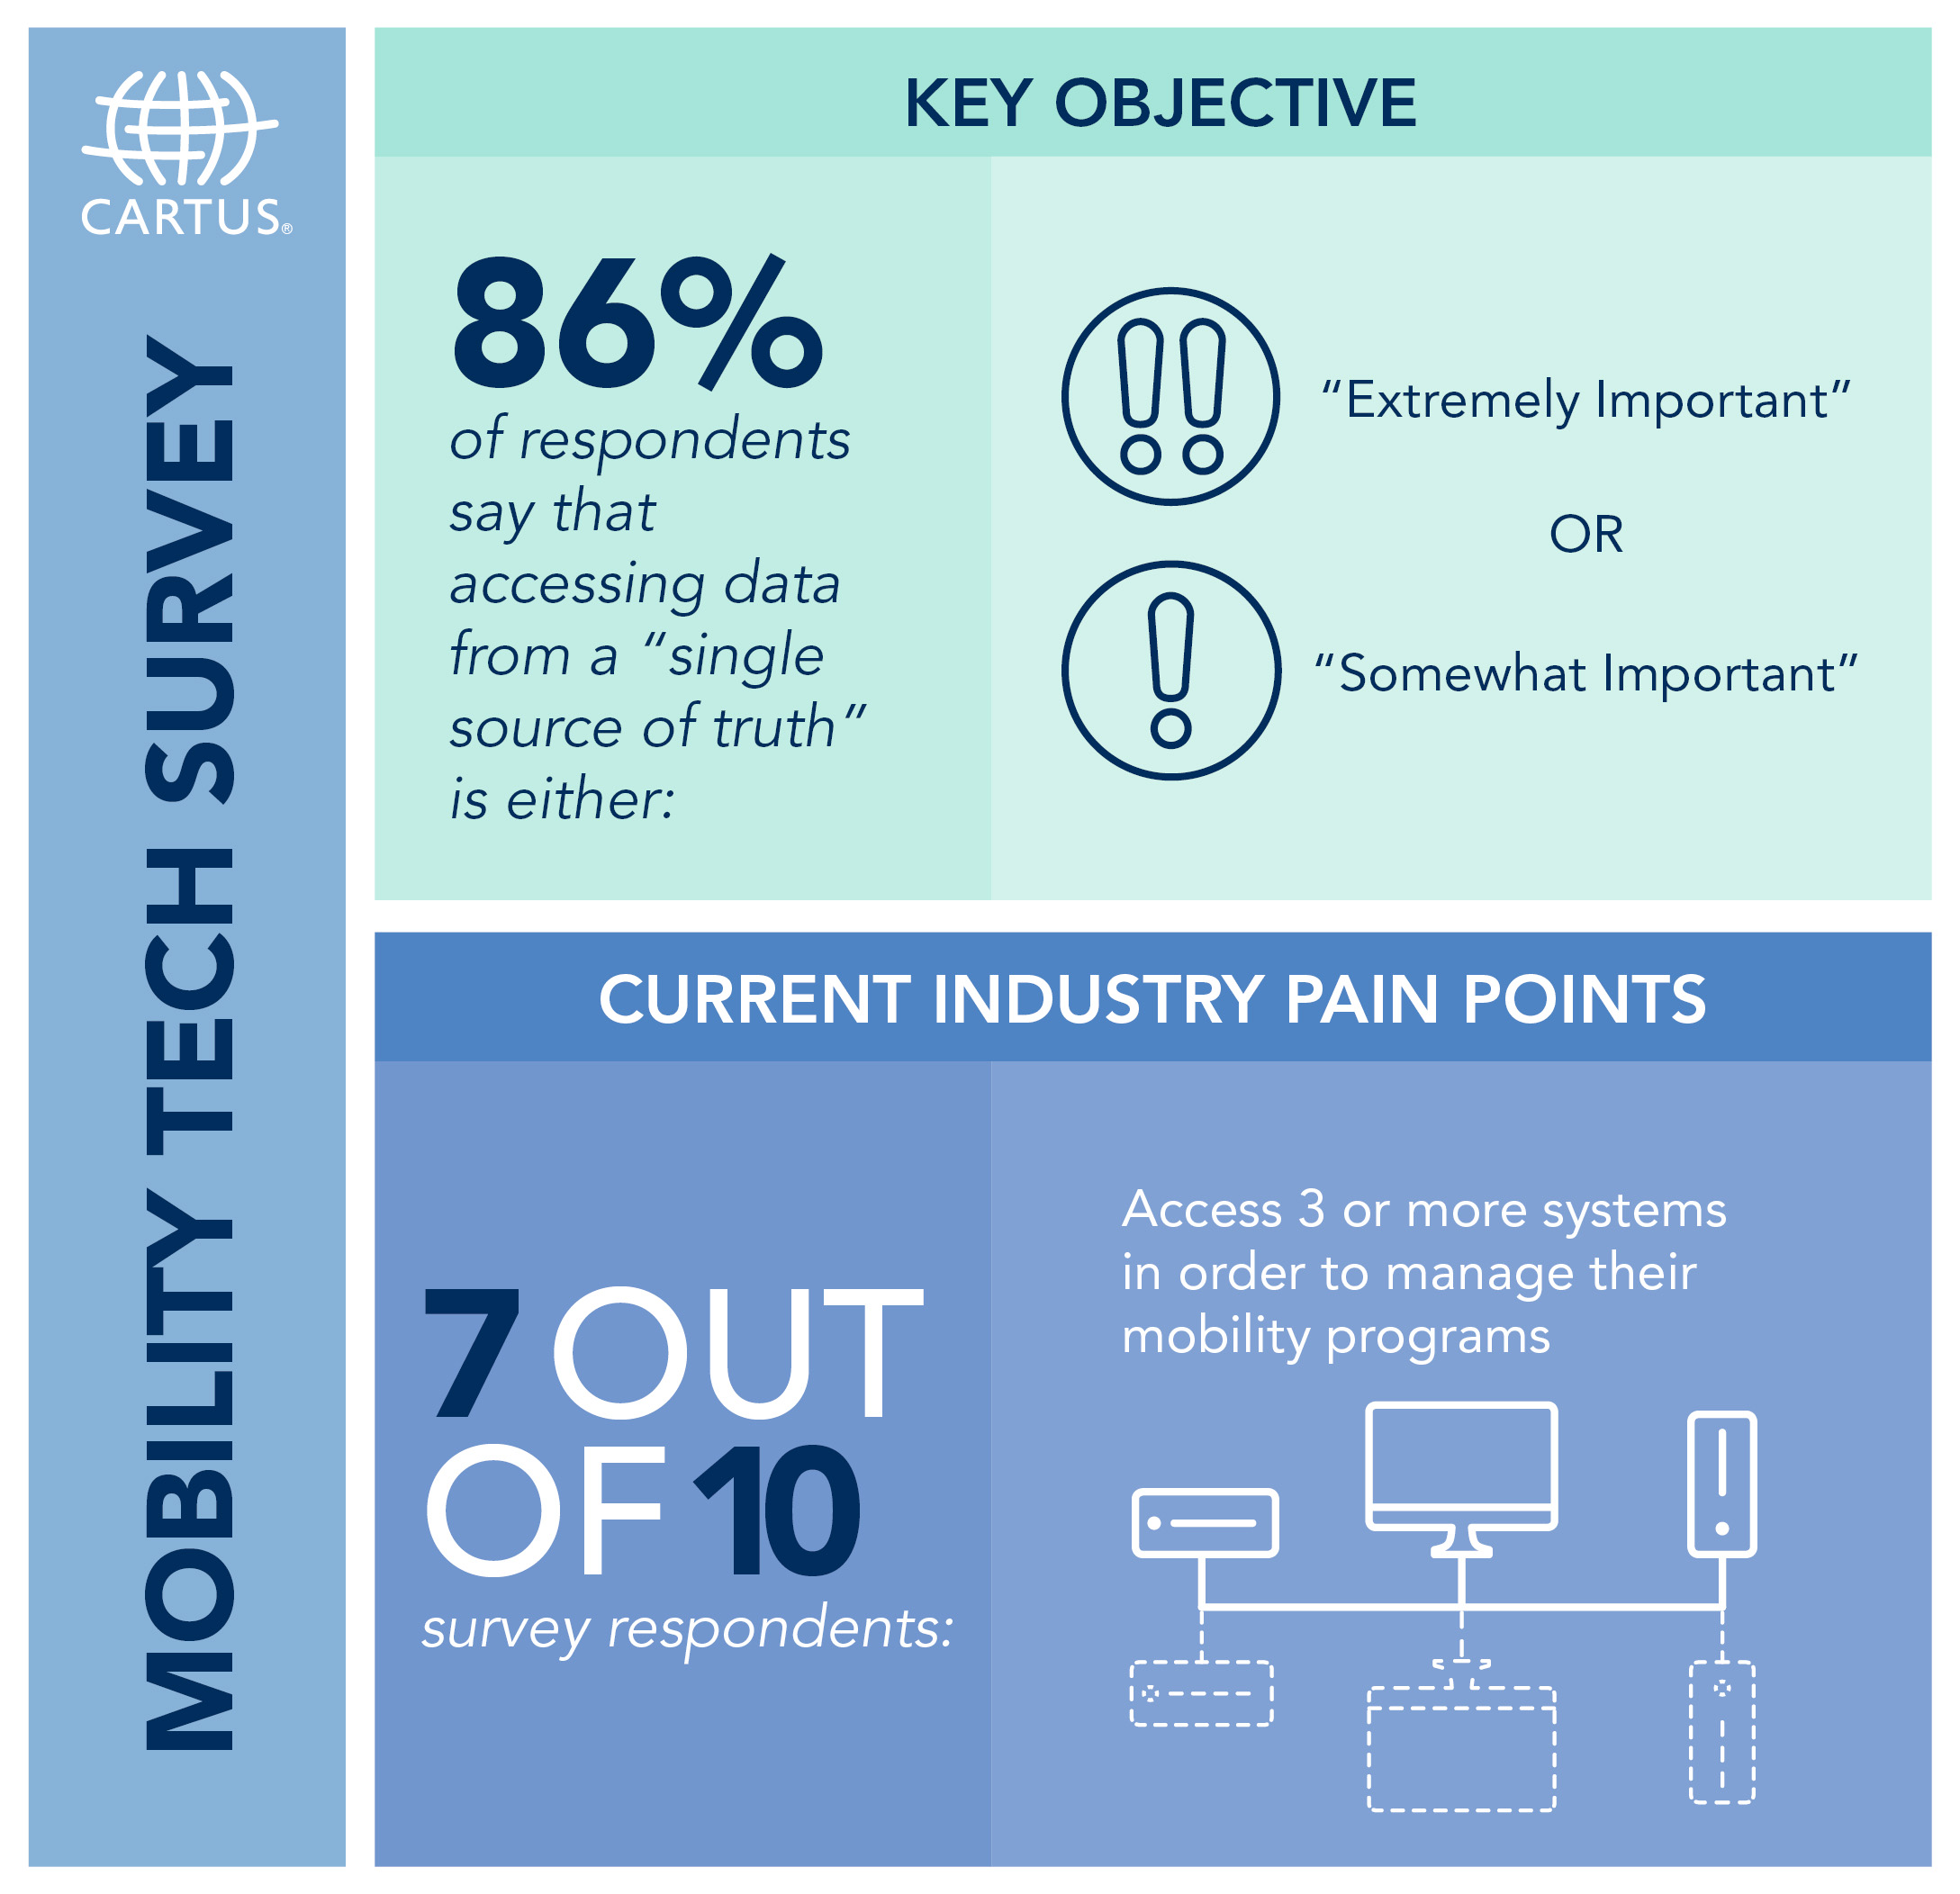 Key objects and industry pain points from survey respondents in the mobility industry as identified by the MovePro360 team at Cartus.